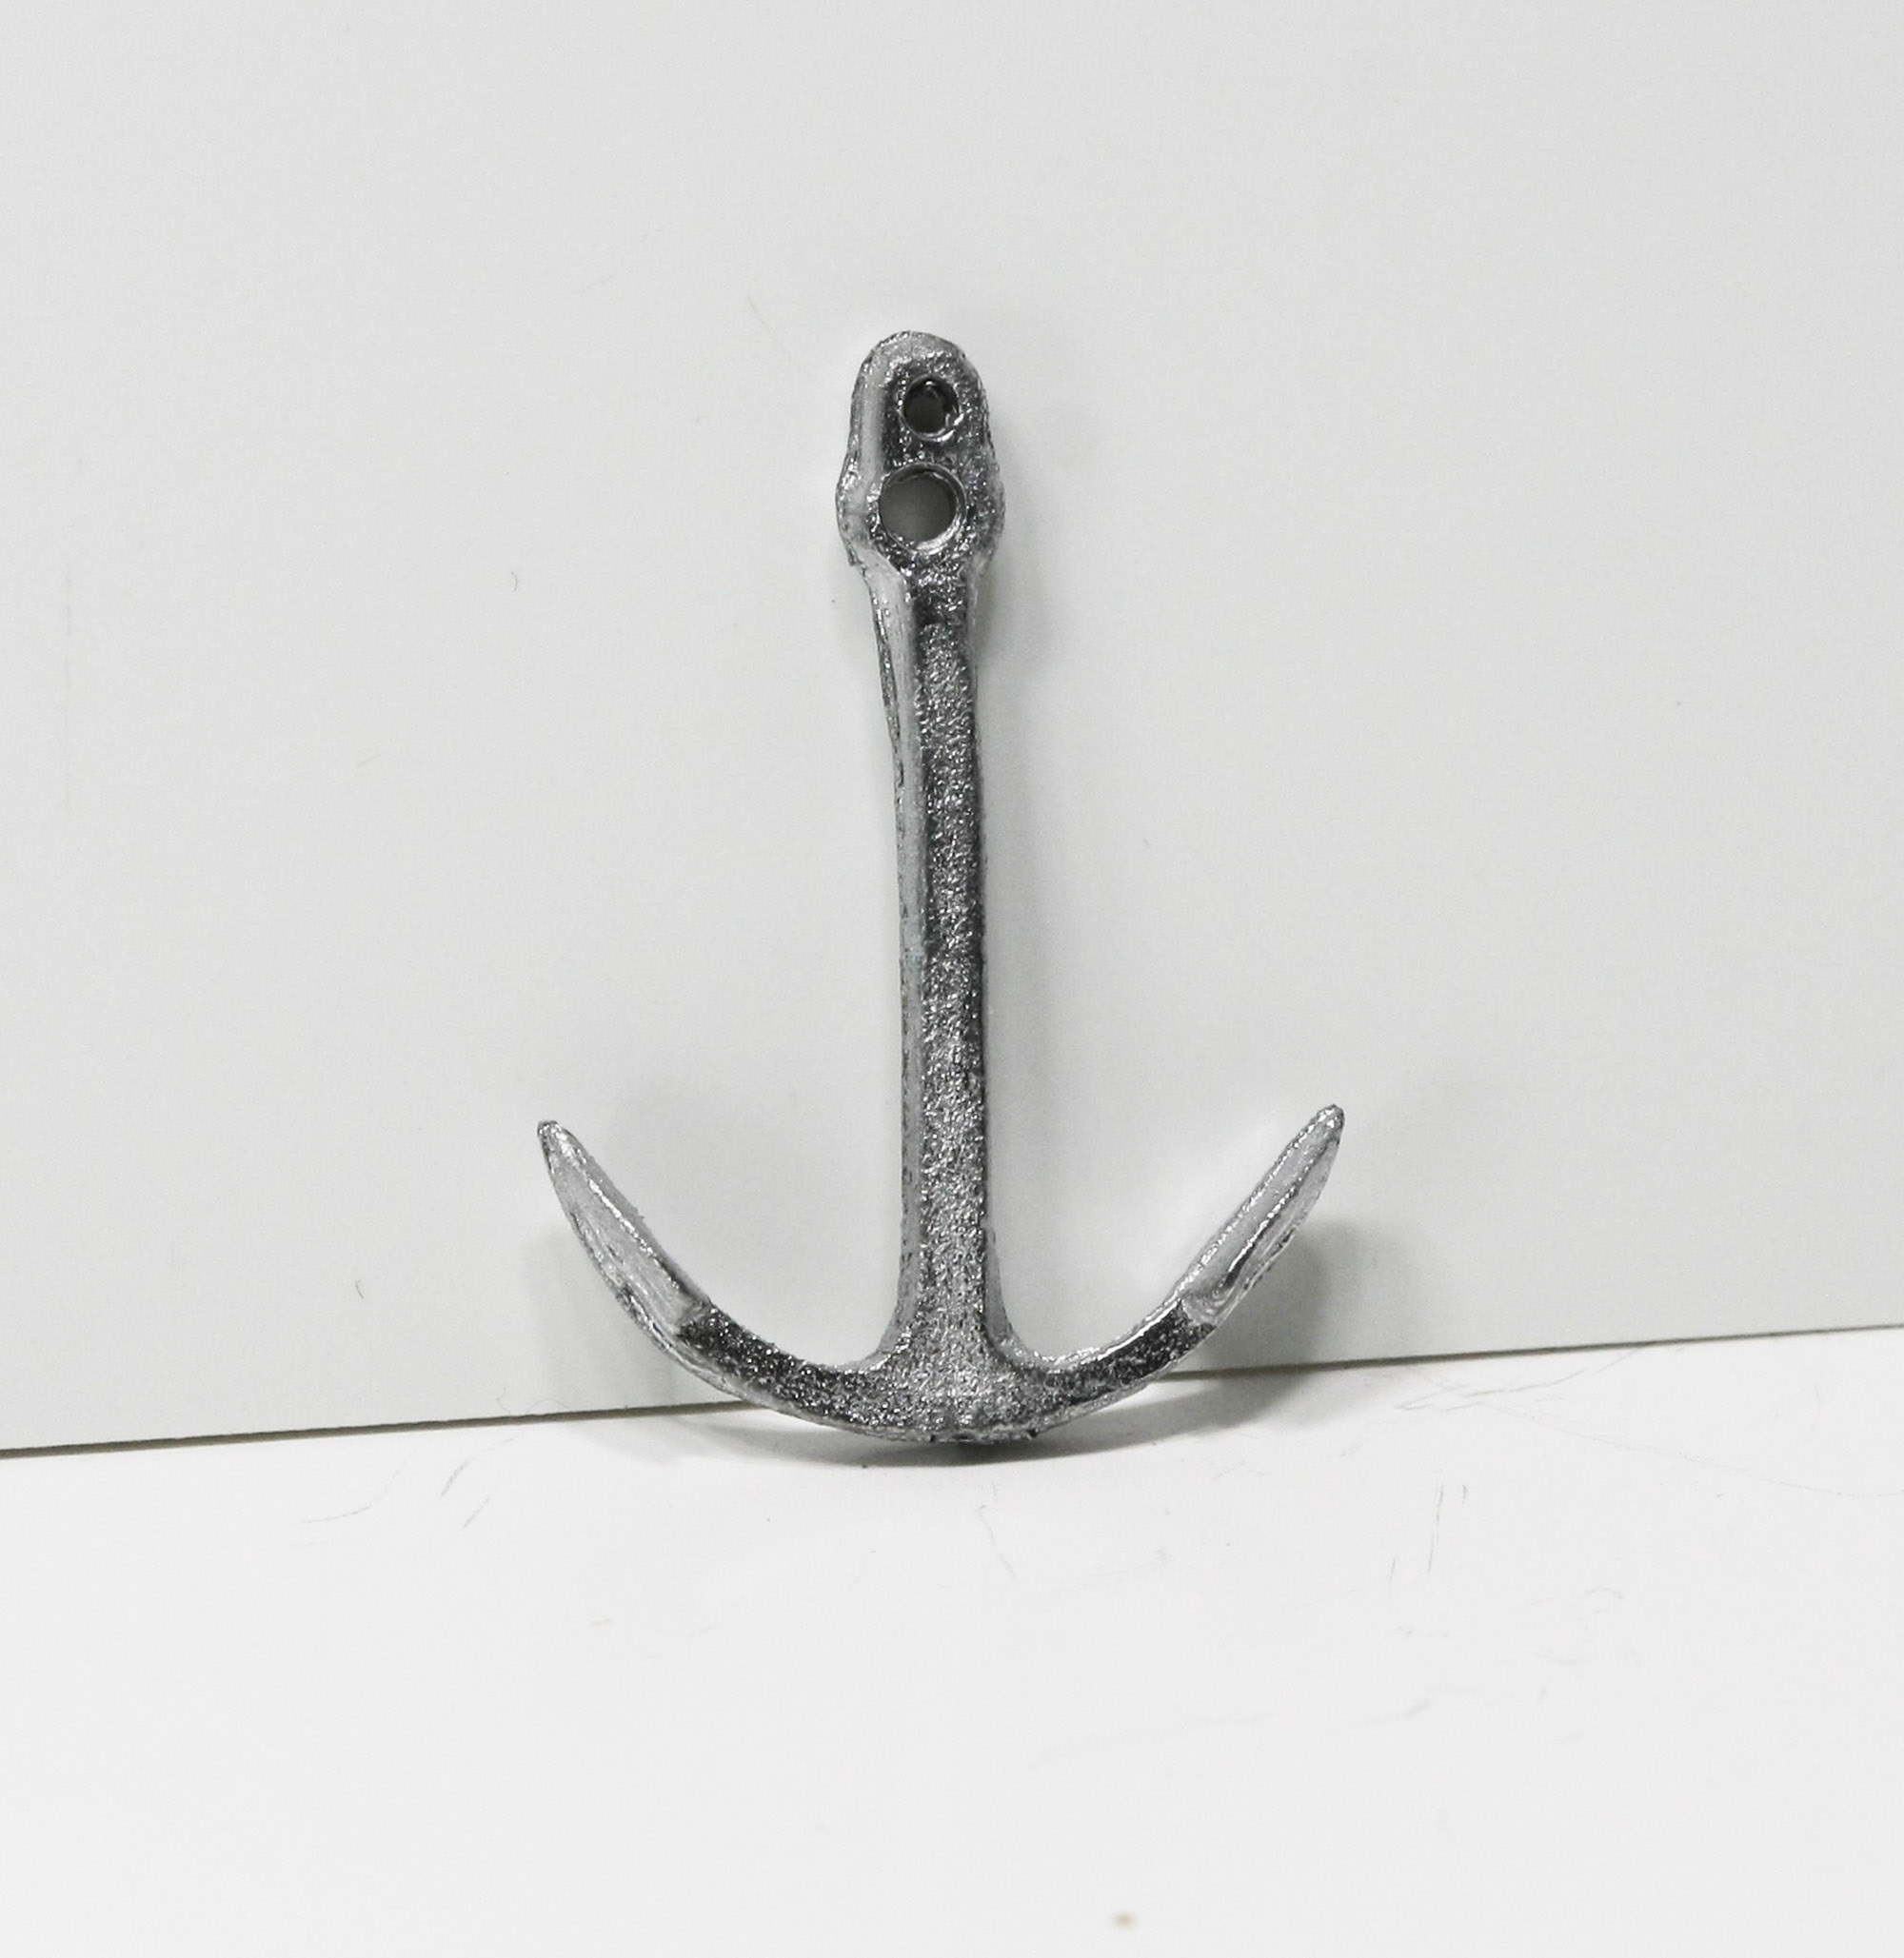 Small Boat Anchor by Island Crafts and Miniatures K6E